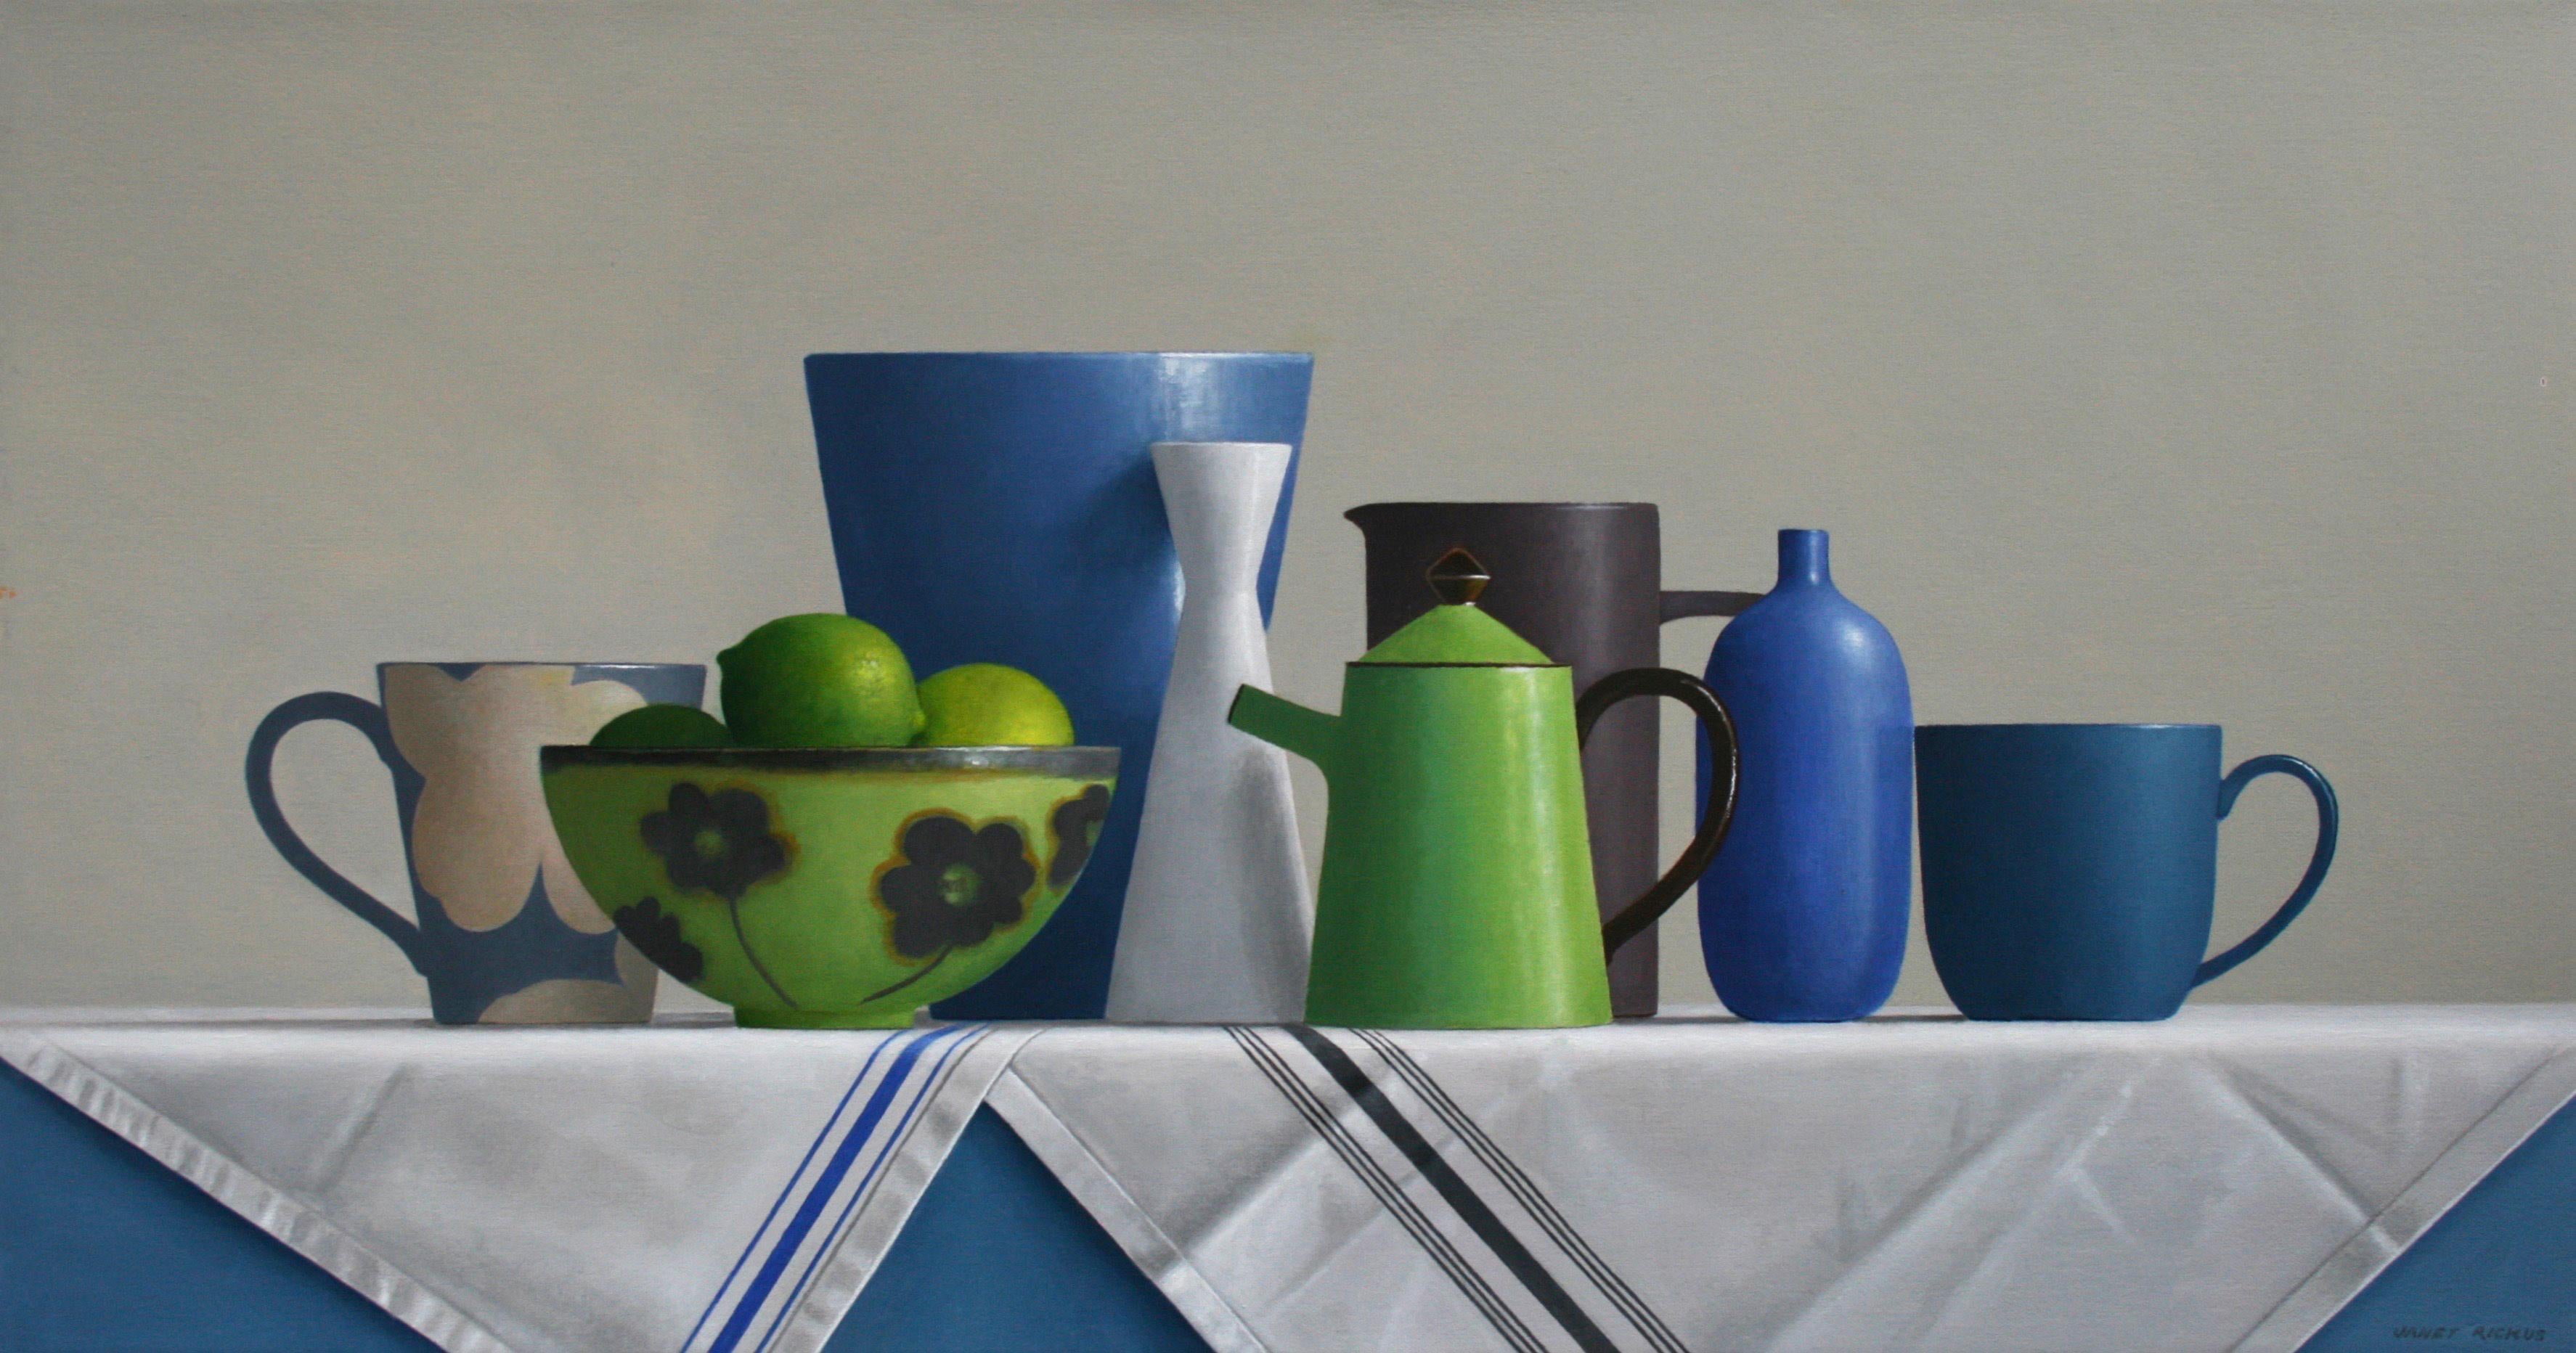 STILL LIFE WITH POTTERY, contemporary academic realism, green, still life, 